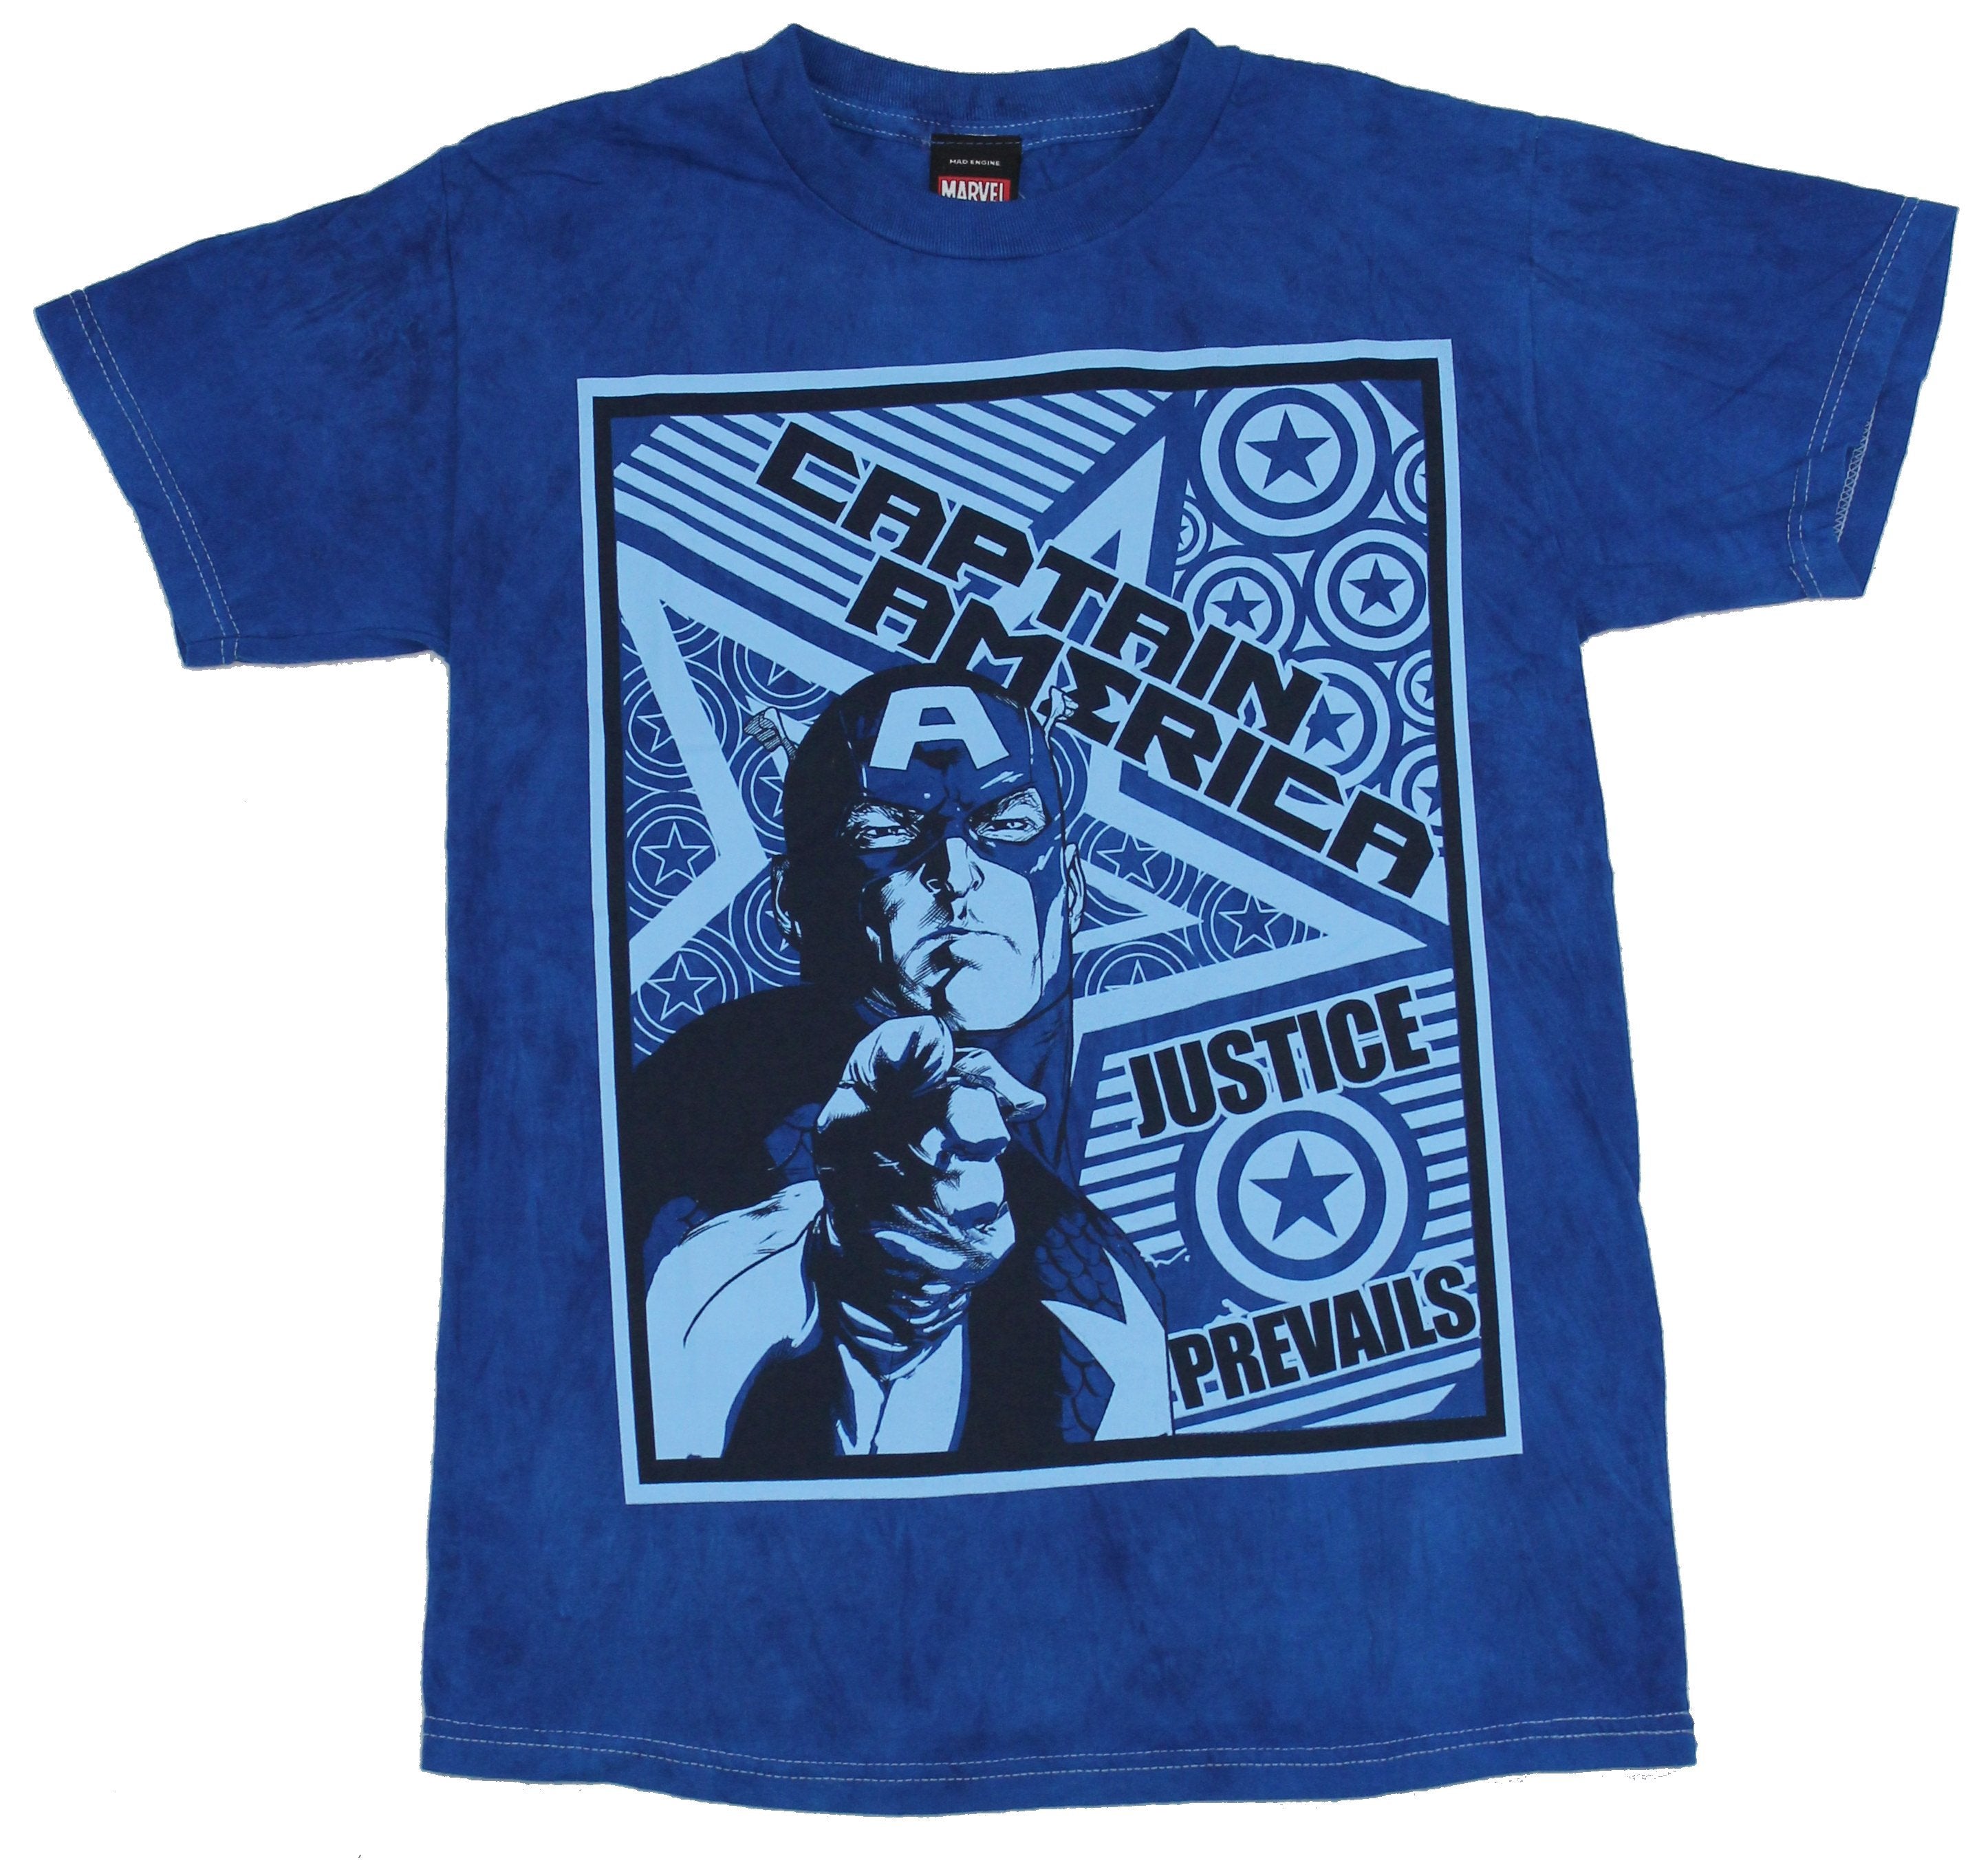 Captain America (Marvel) Mens T-Shirt -Justice Prevails Poster Style Image